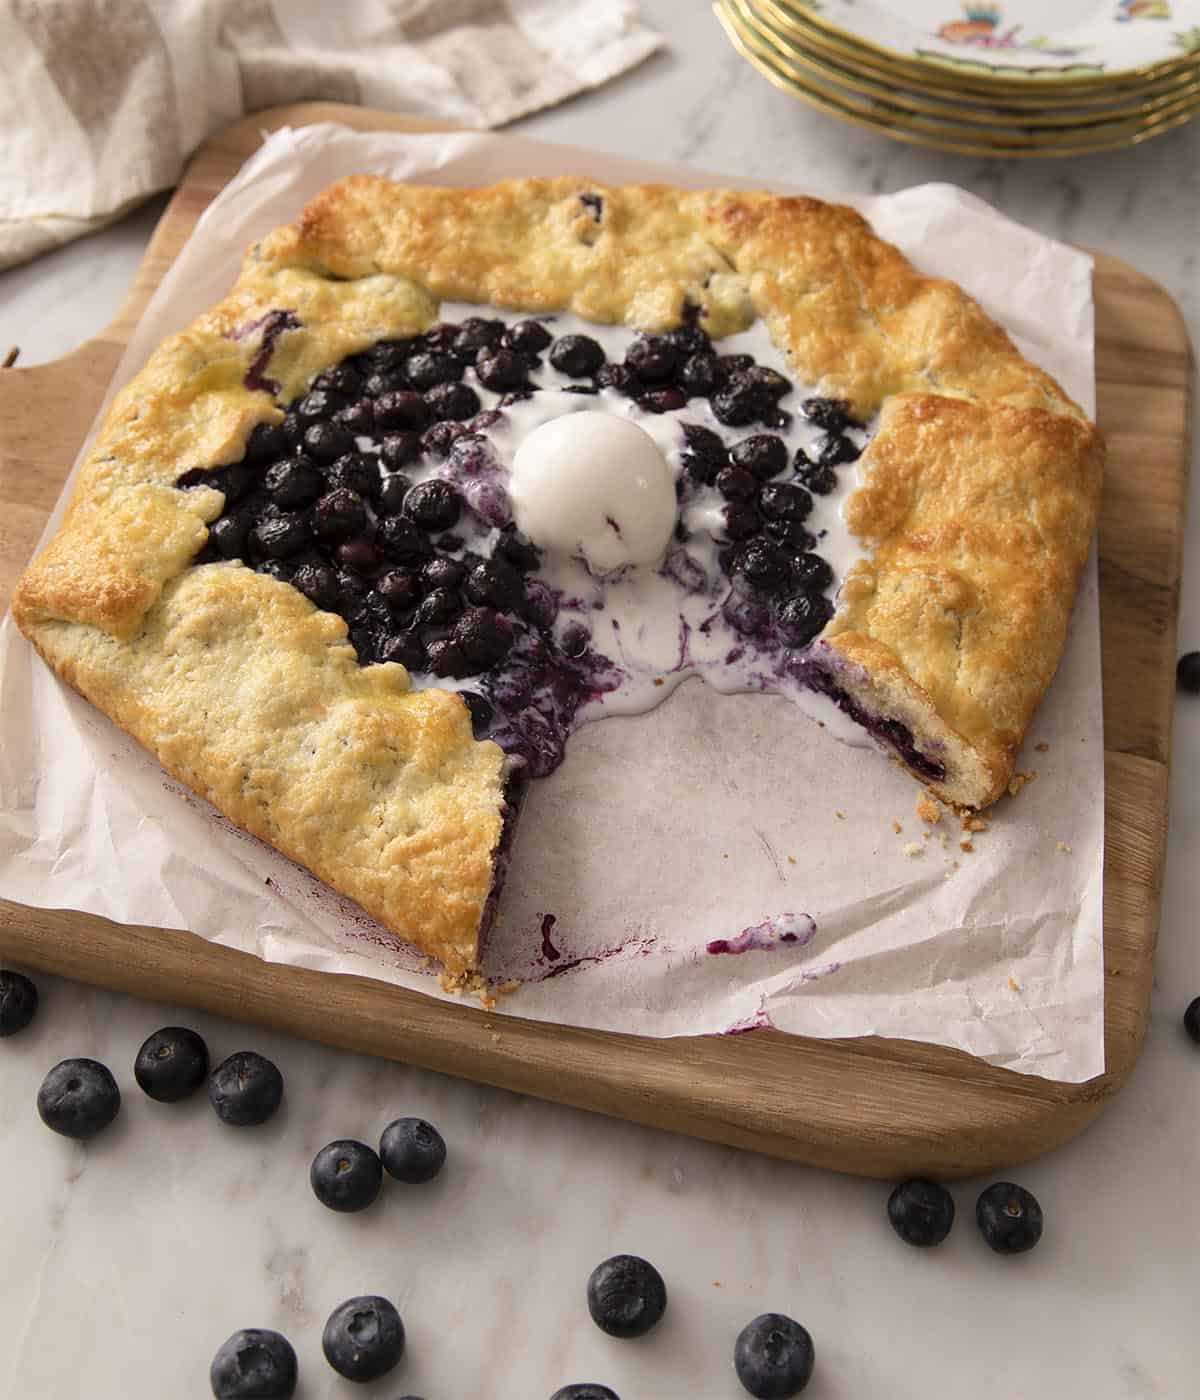 A blueberry galette on a wooden cutting board with a piece removed.